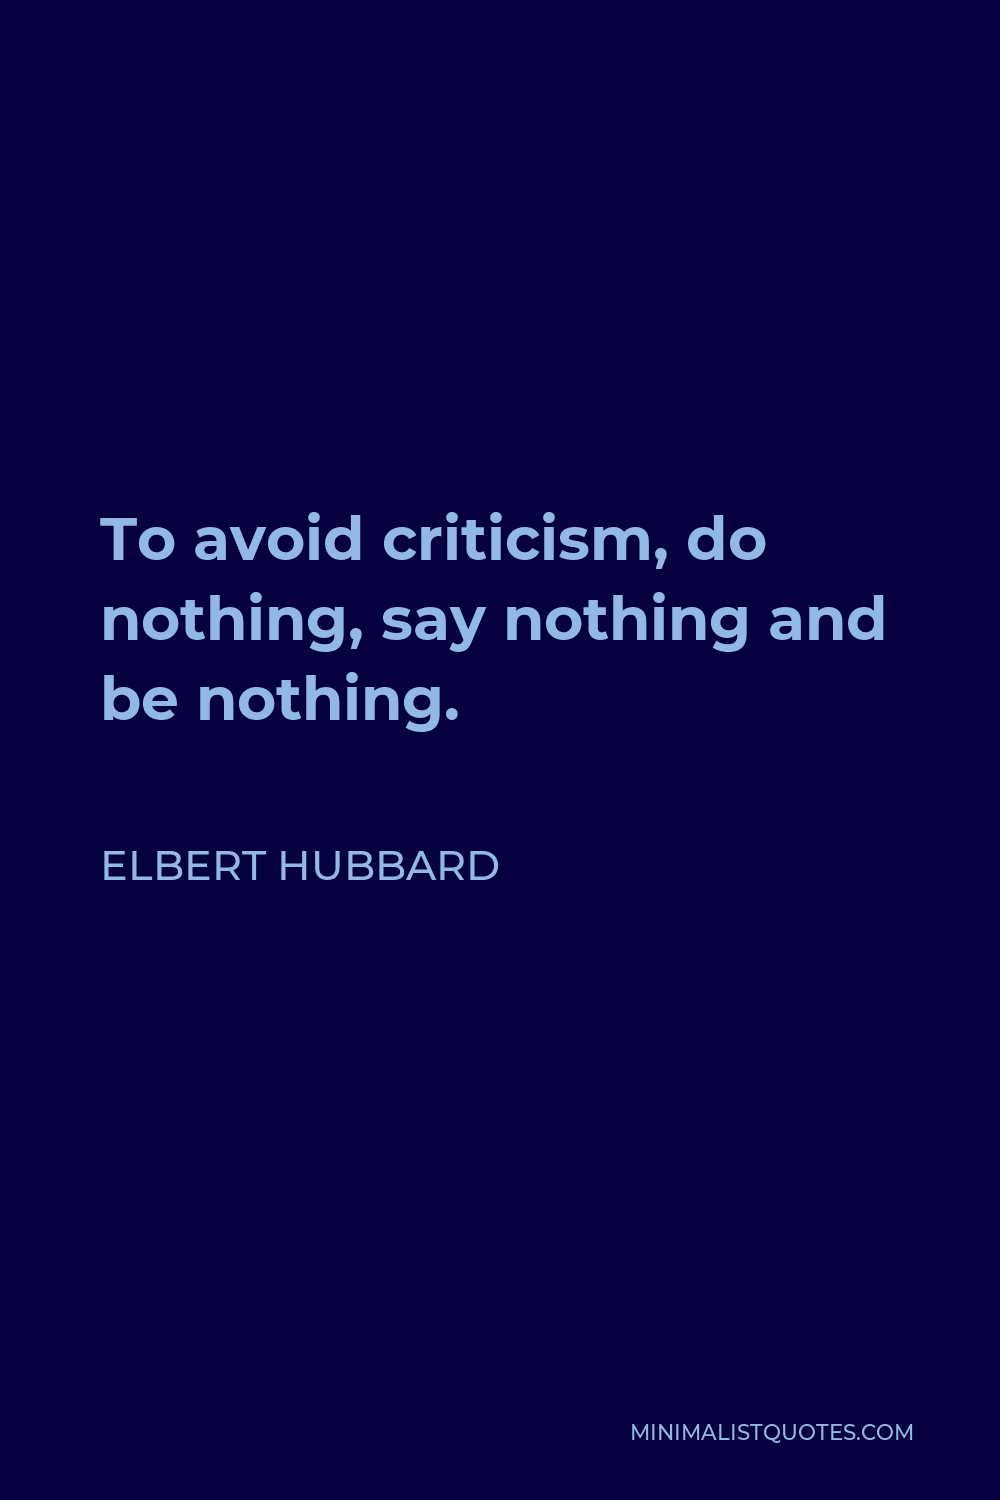 Elbert Hubbard Quote - To avoid criticism, do nothing, say nothing and be nothing.